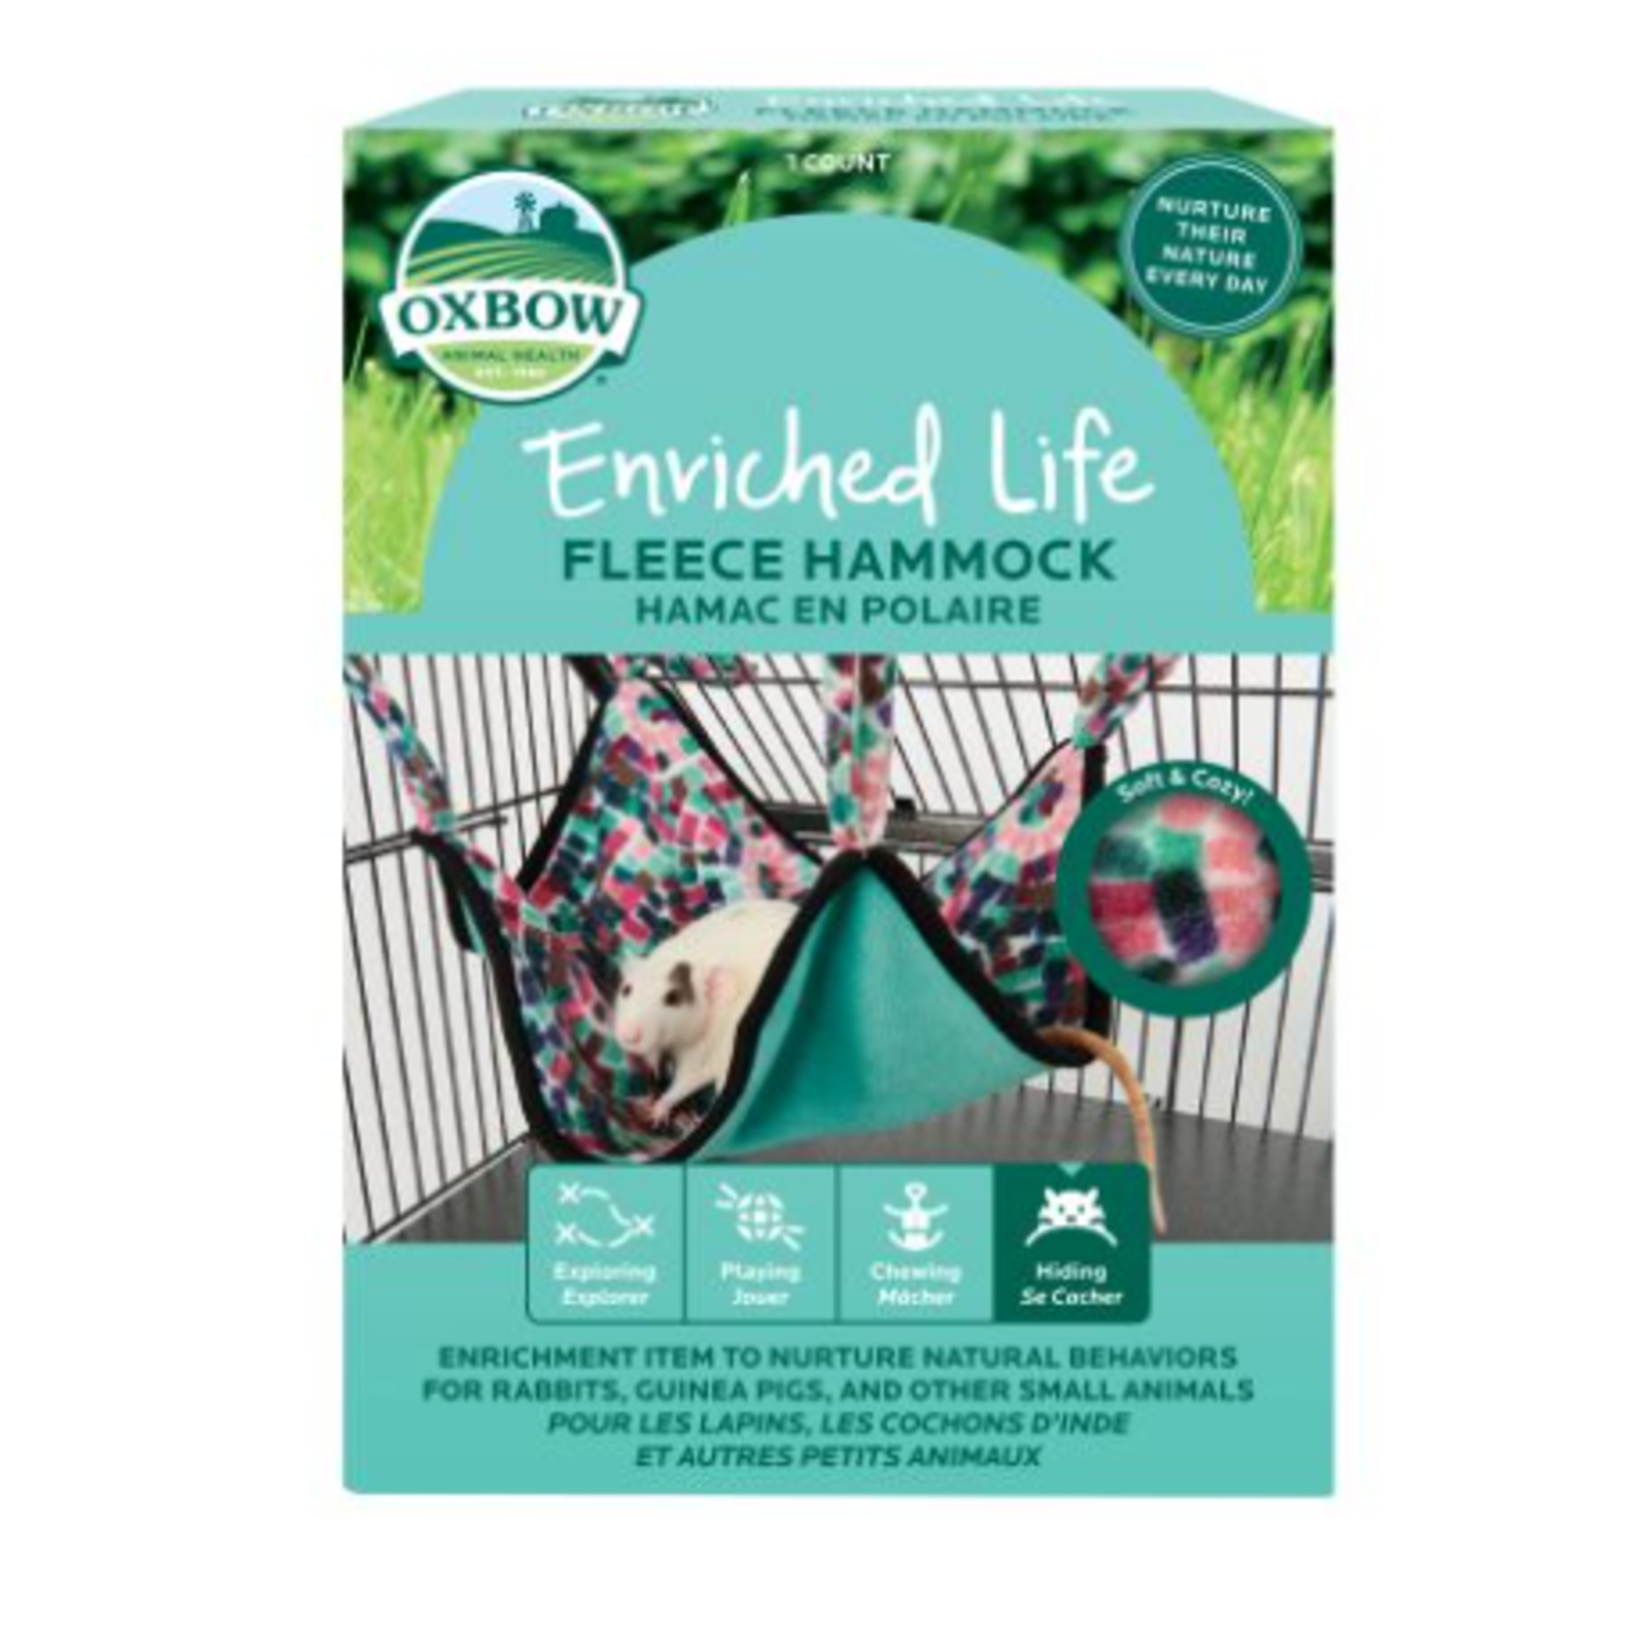 Oxbow Enriched Life - Fleece Hammock - For Rodent